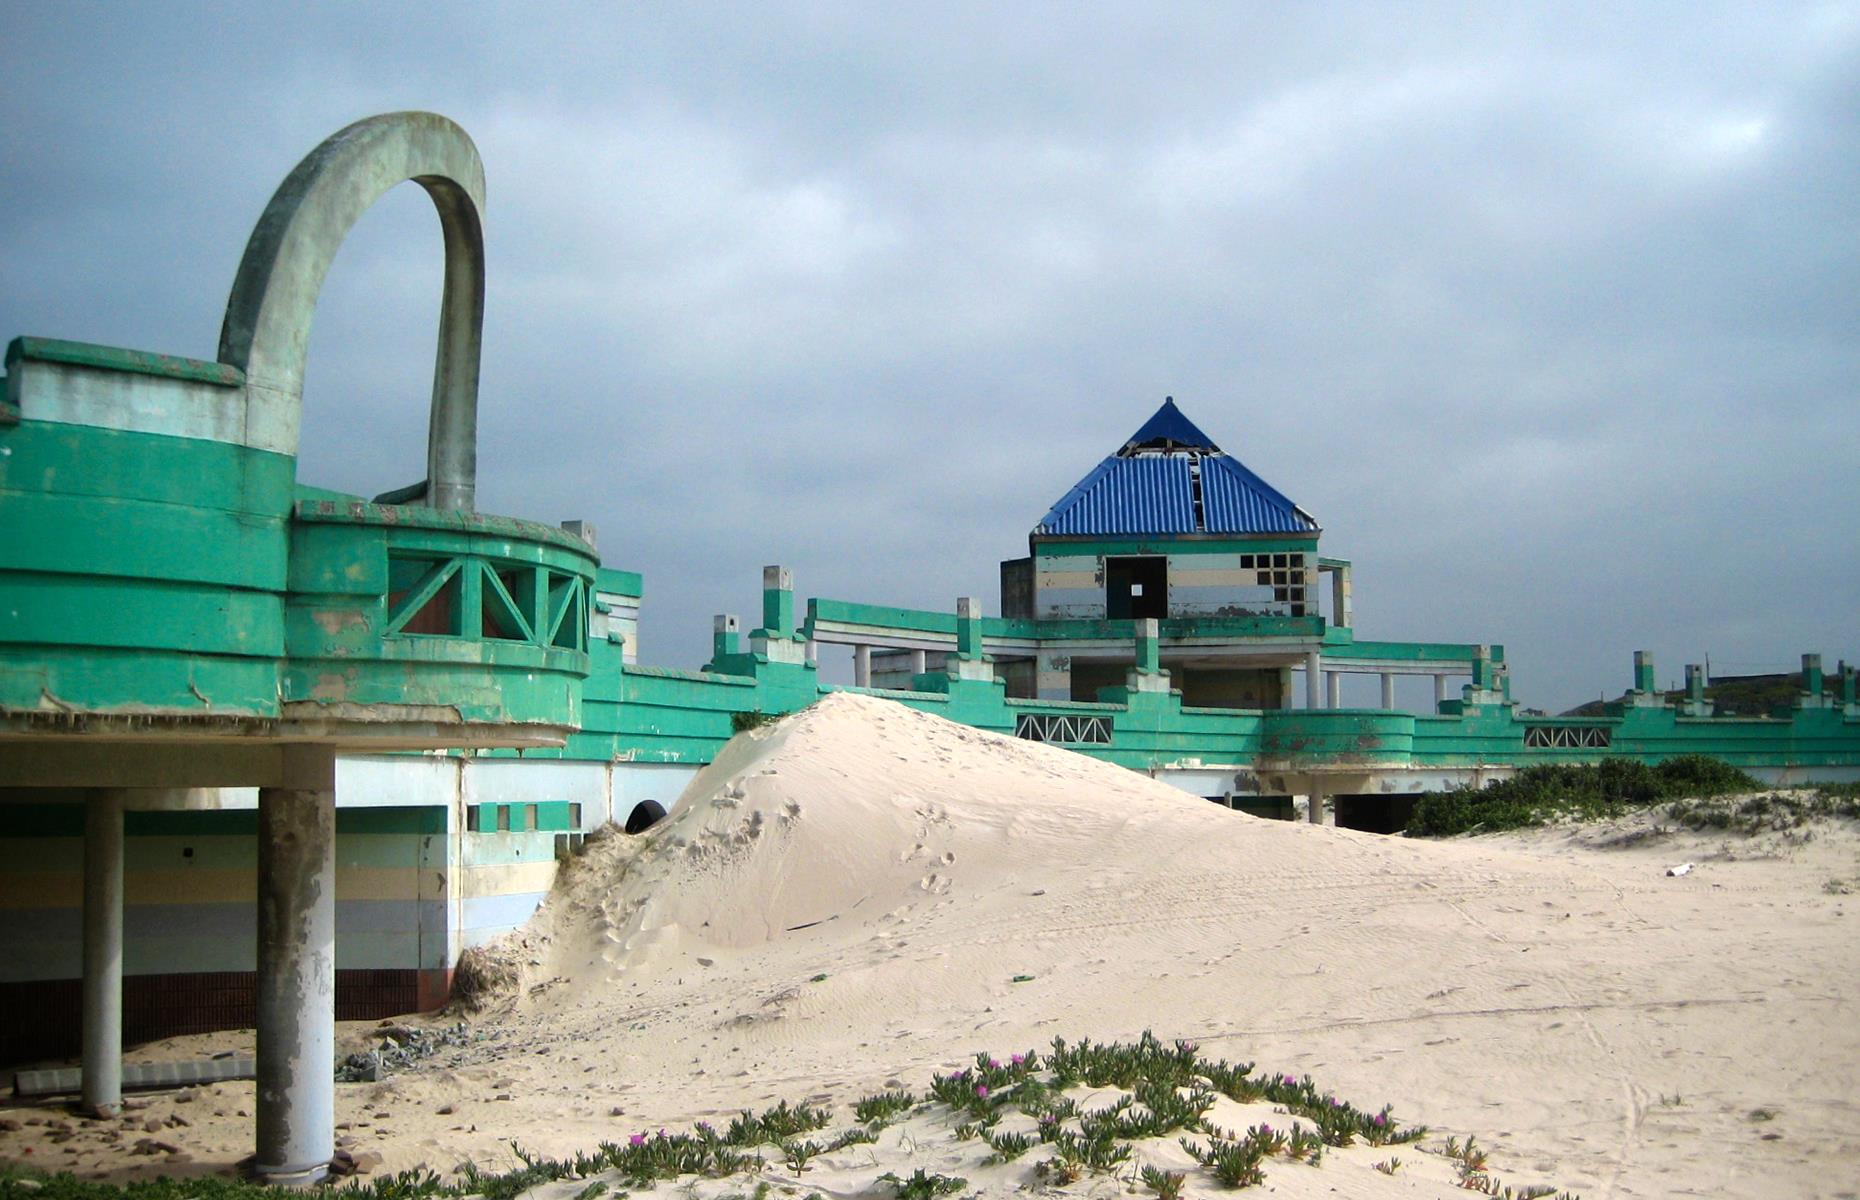 The Macassar Dunes Reserve spreads out for more than 2,000 acres, and is home to ever-shifting sand mountains and a bounty of wildlife. It's also host to the remains of an abandoned water park, Macassar Beach Pavilion. First opened in the Nineties, the park was subsequently closed and deserted. Today its slides, pavilions and walkways are swallowed by the sand.